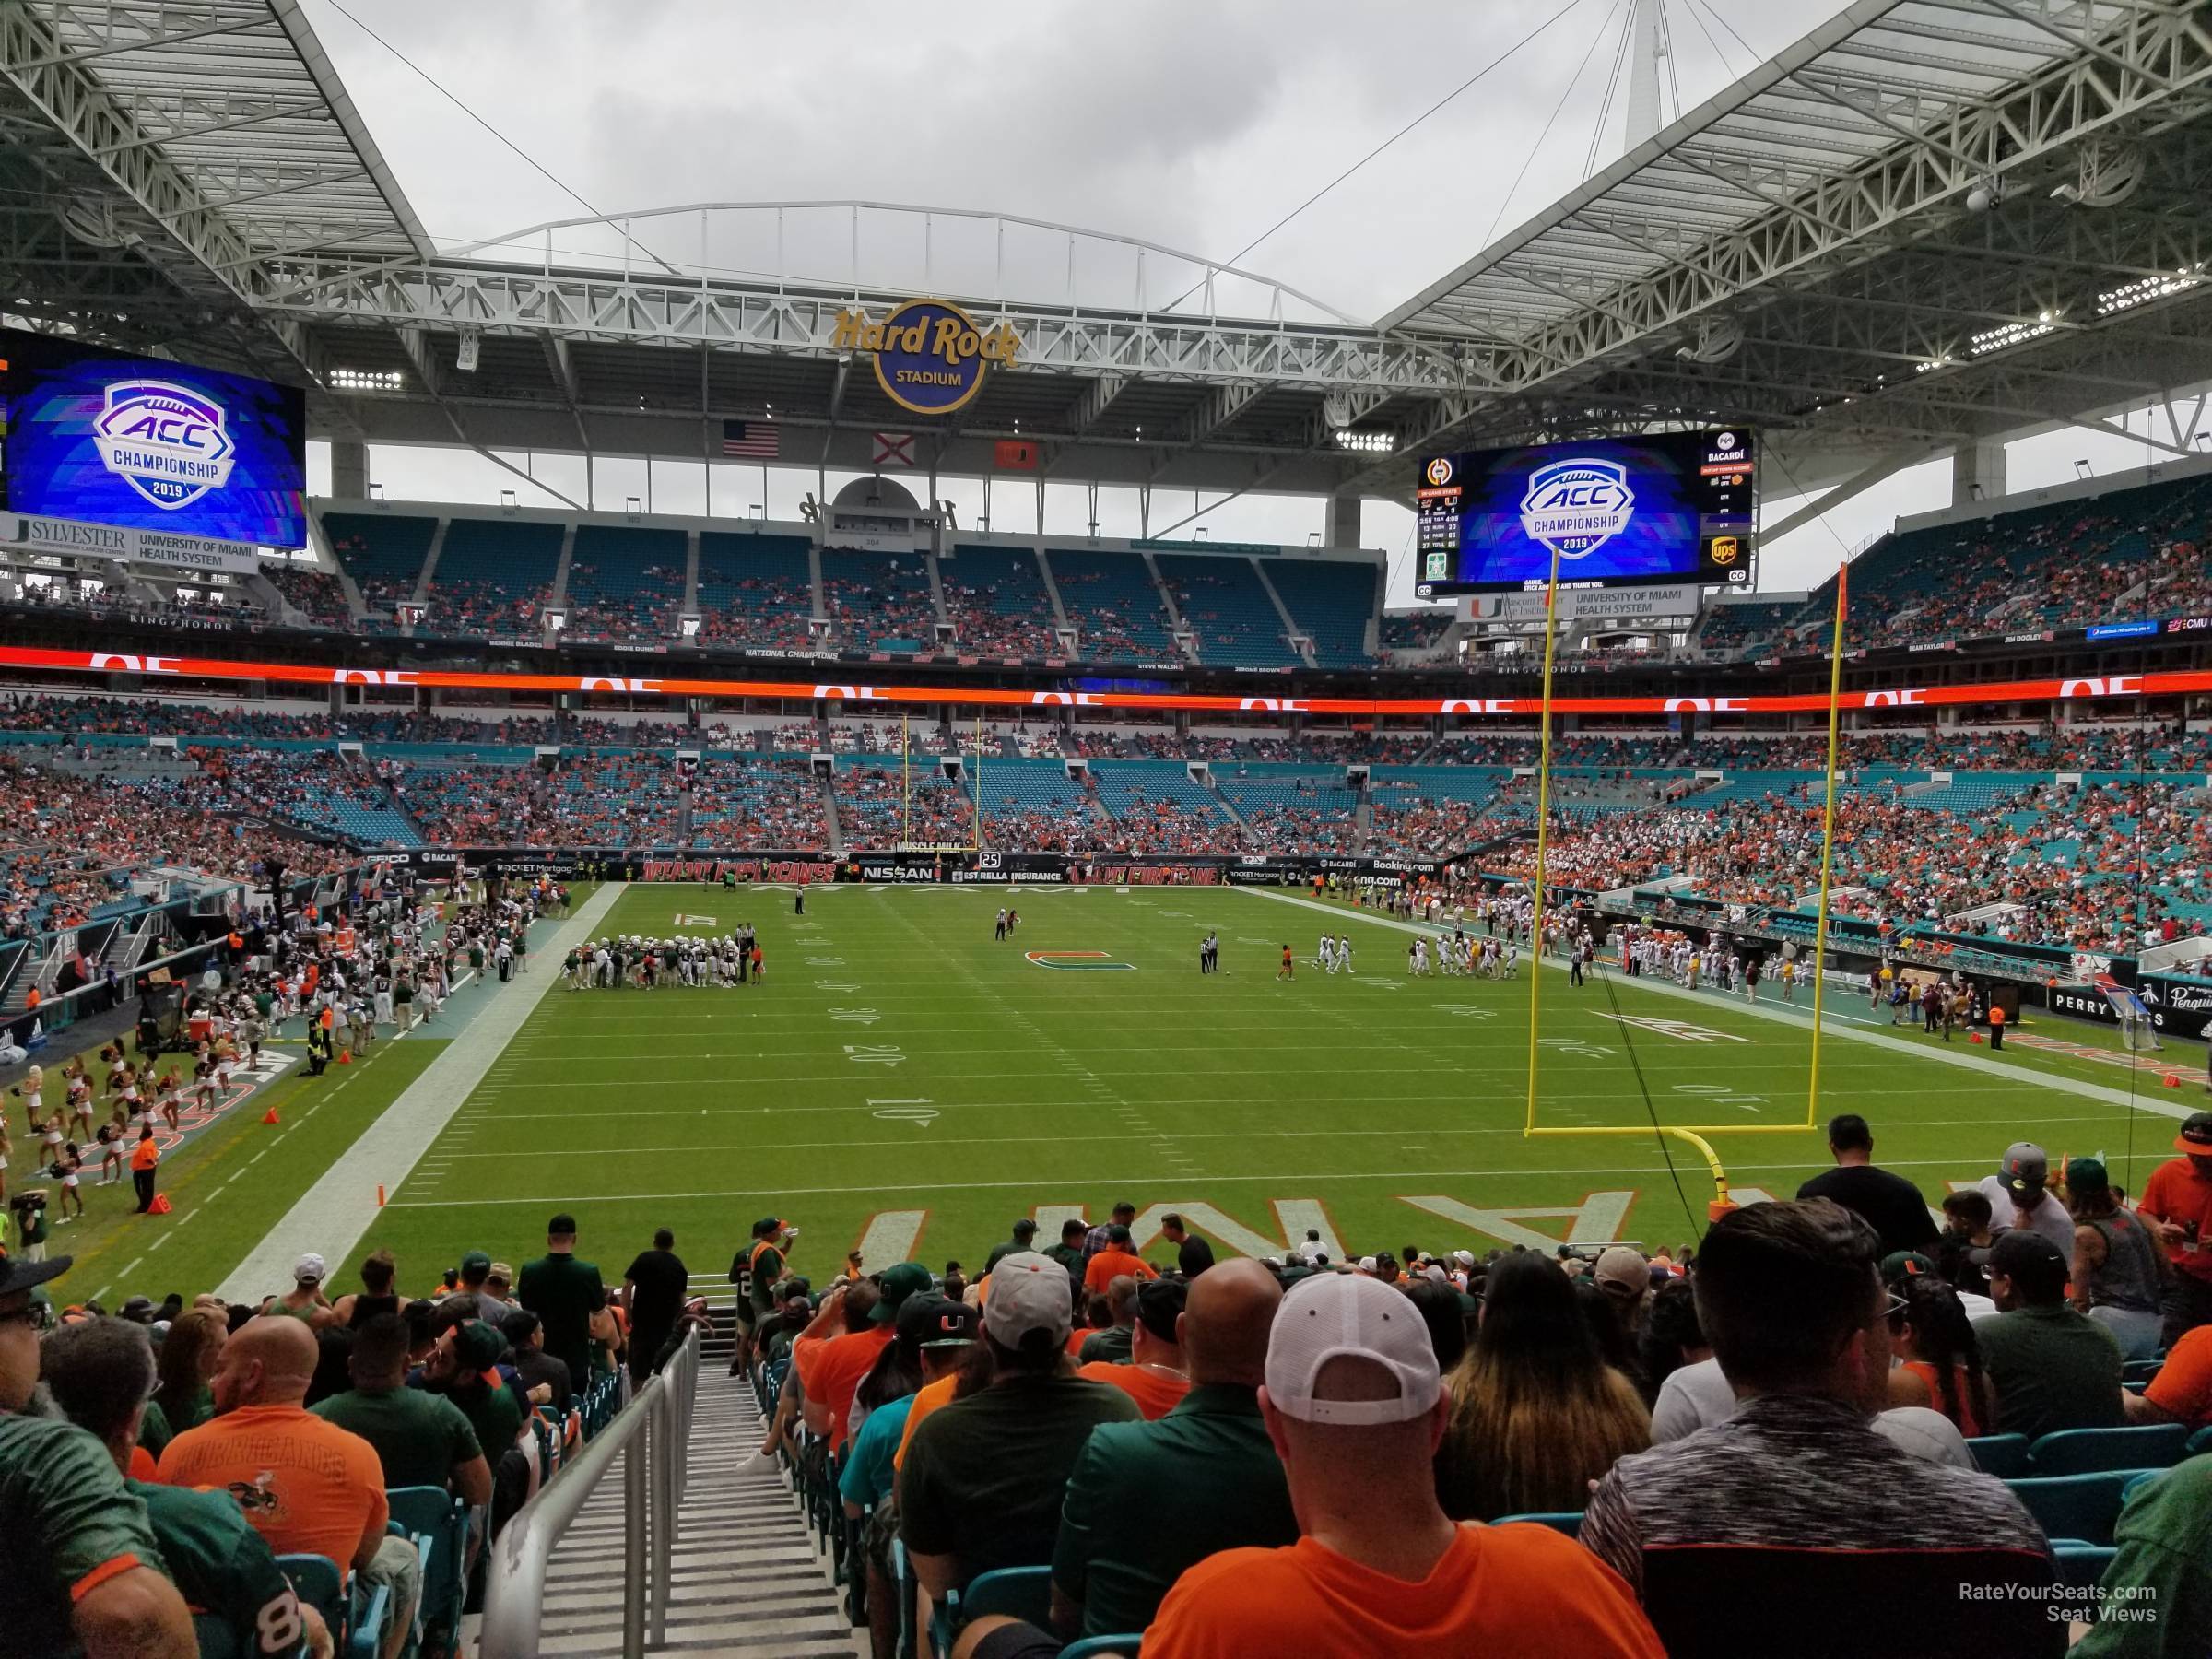 section 133, row 28 seat view  for football - hard rock stadium